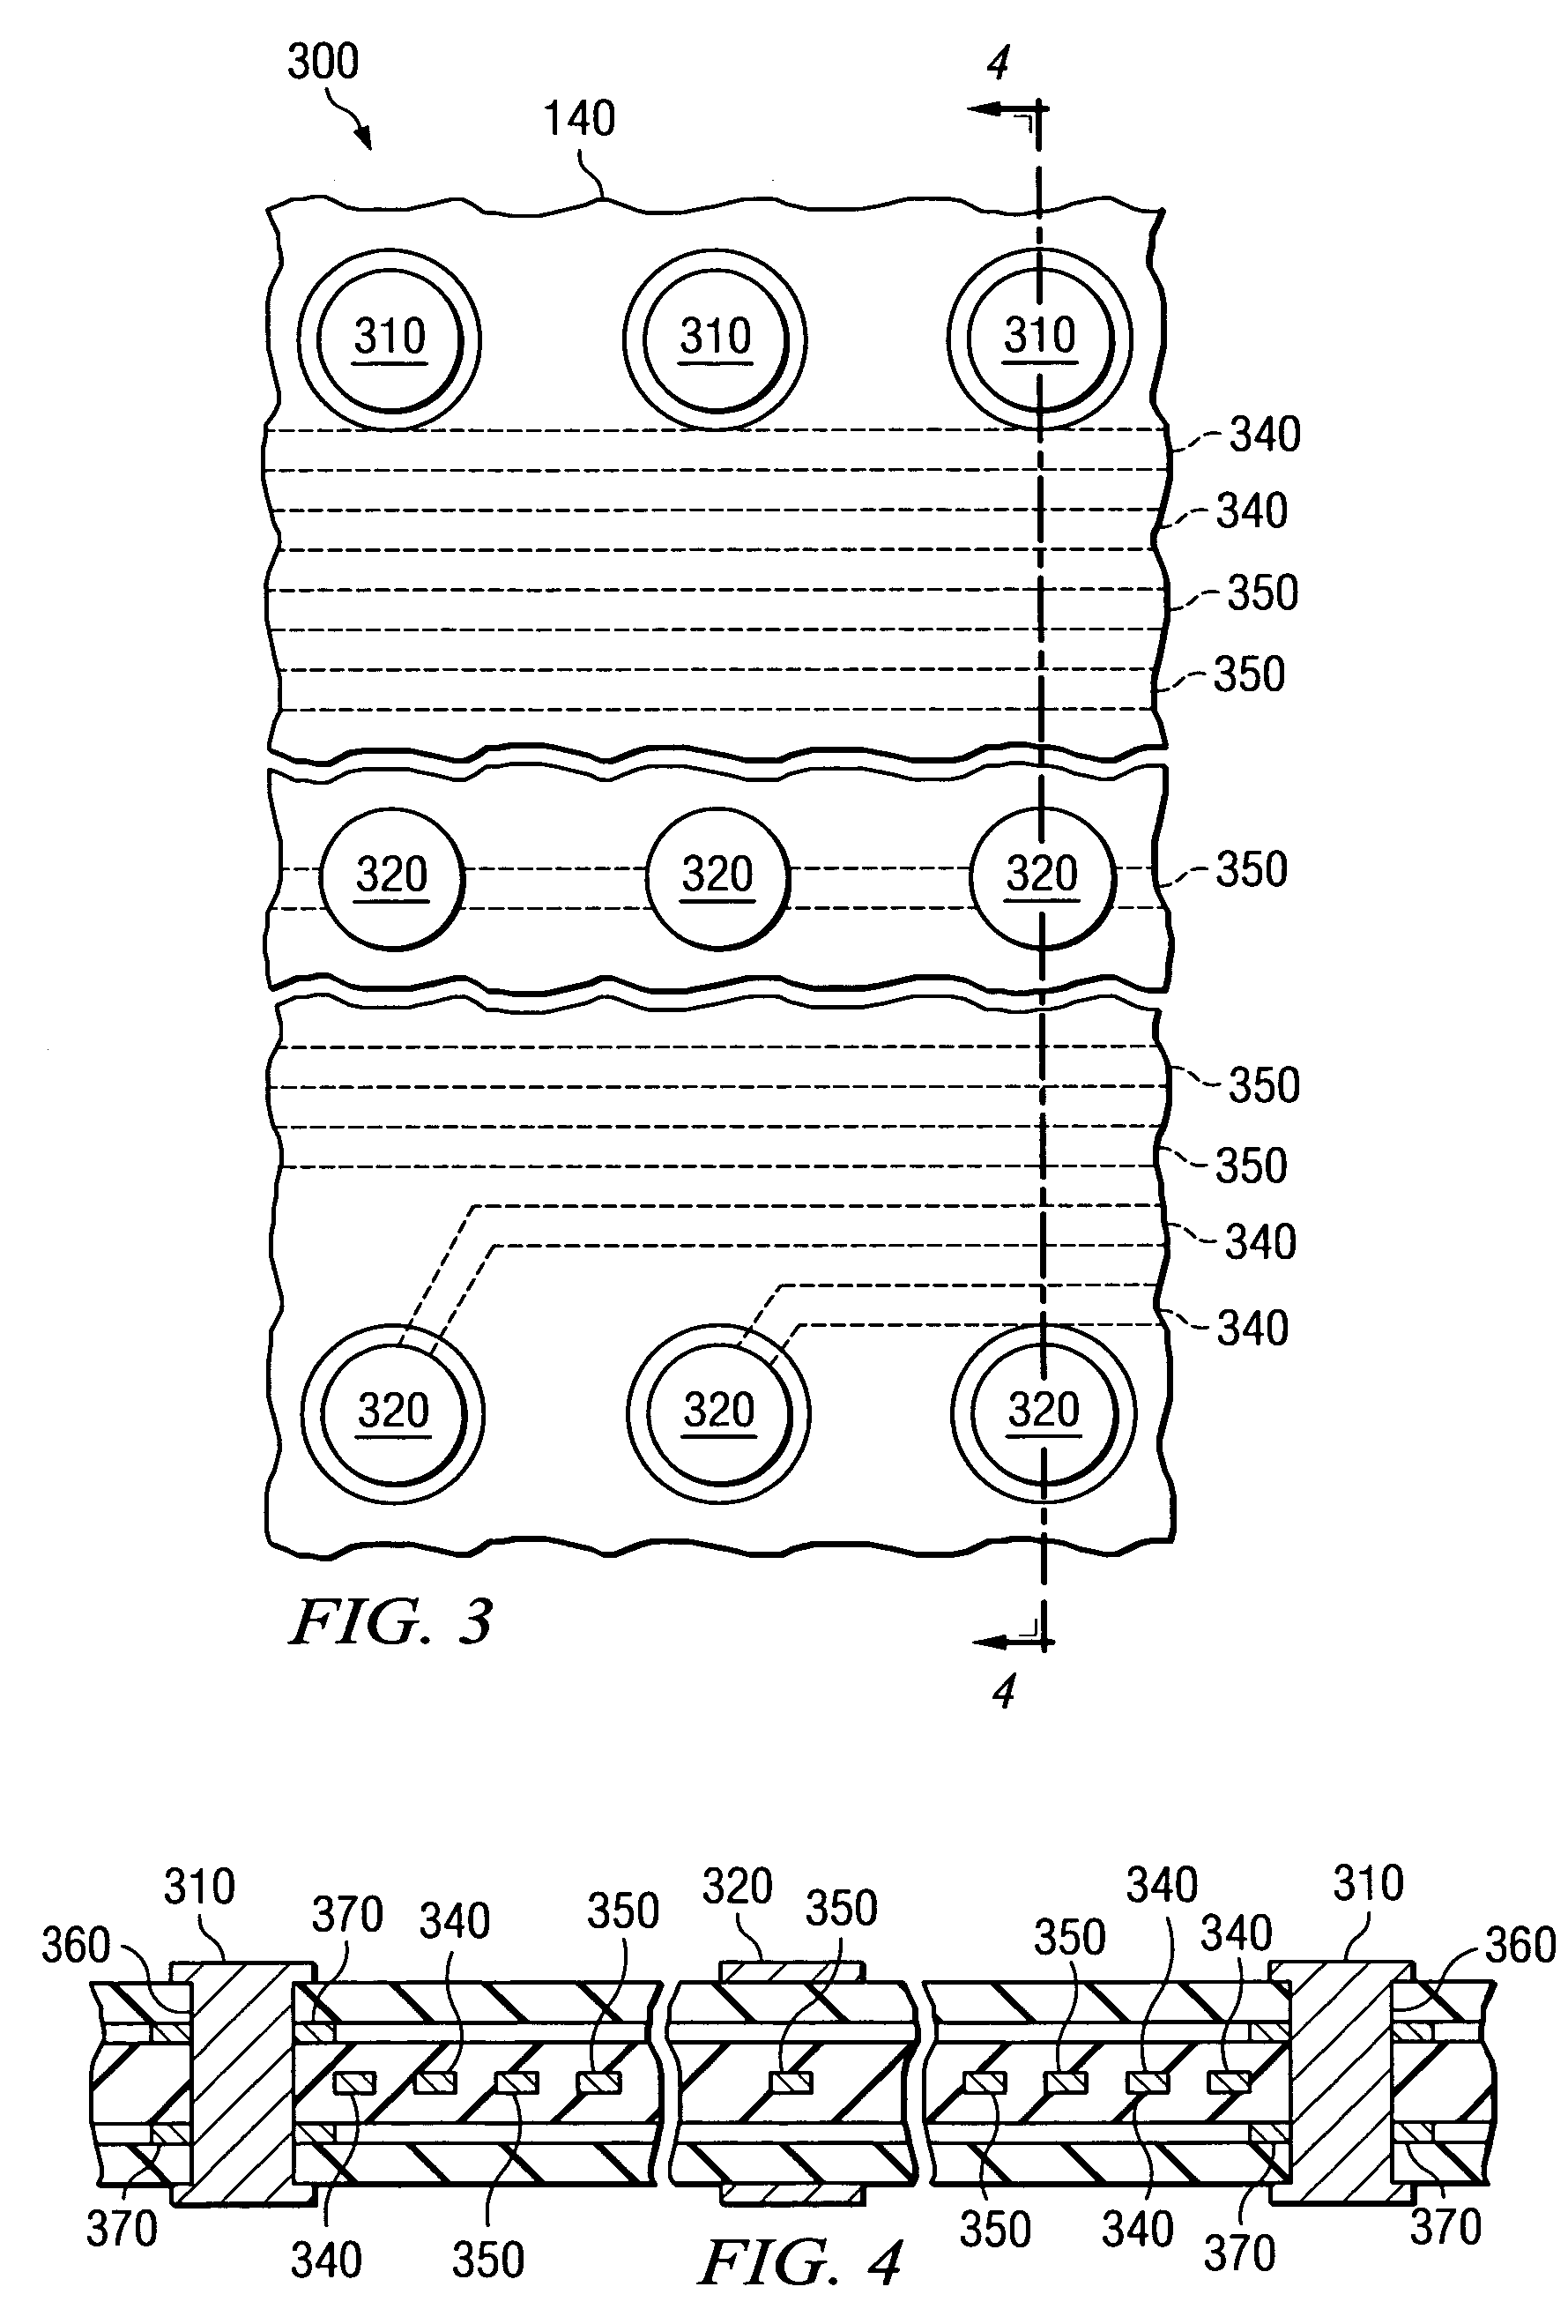 System and method for increasing wiring channels/density under dense via fields